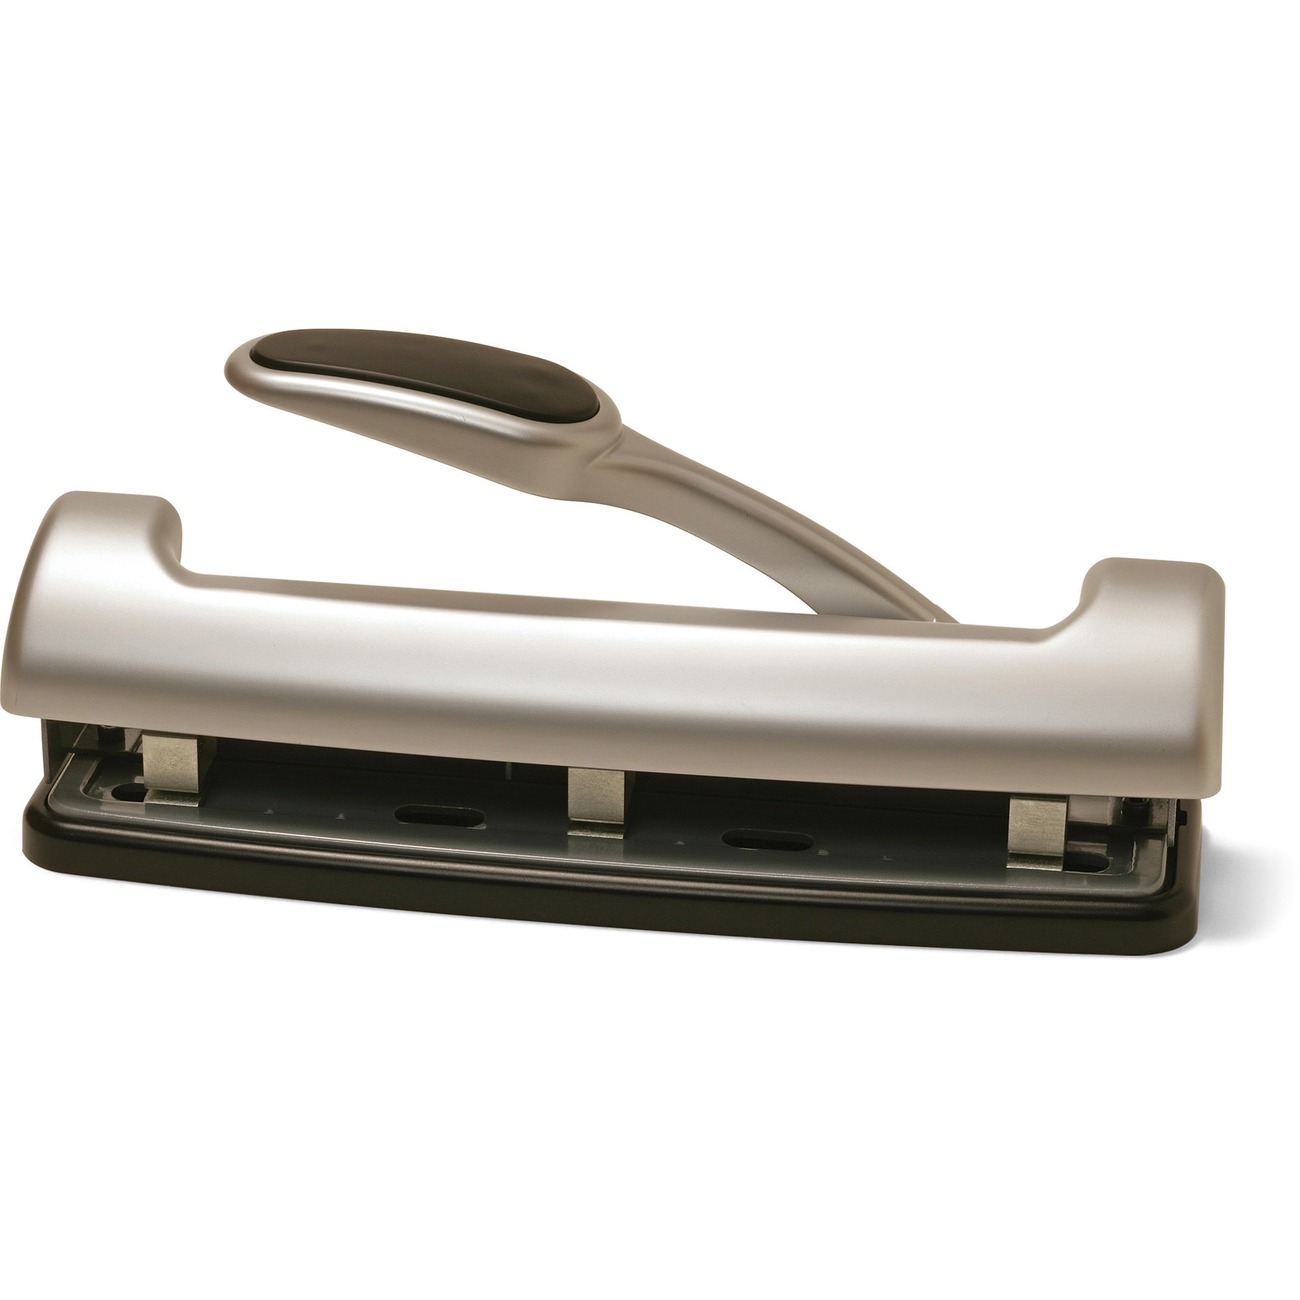 Bostitch Antimicrobial Adjustable Hole Punch